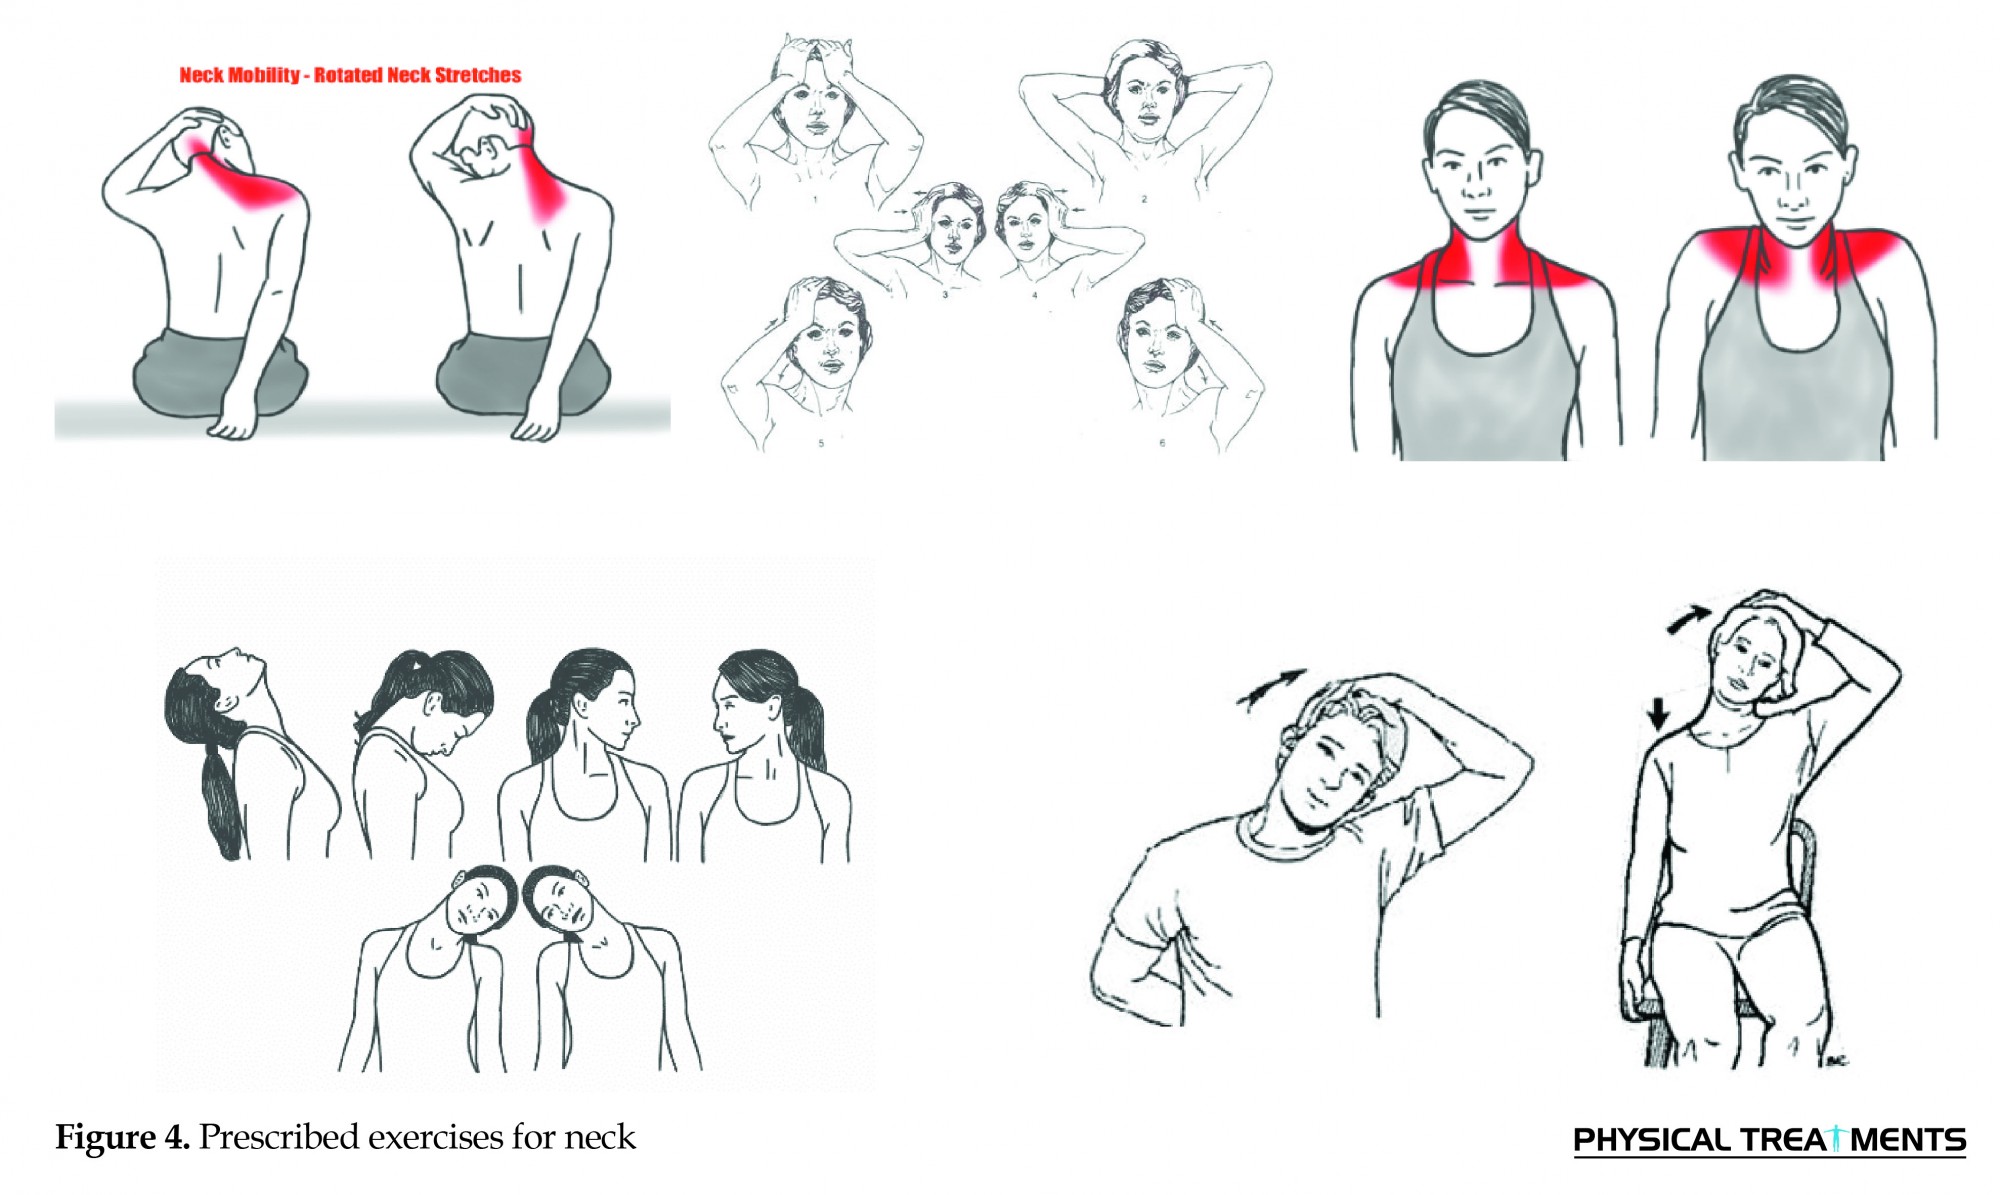 The Effect Of Combination Therapy Manual Therapy And Exercise In Patients With Non-specific Chronic Neck Pain A Randomized Clinical Trial - Physical Treatments - Specific Physical Therapy Journal